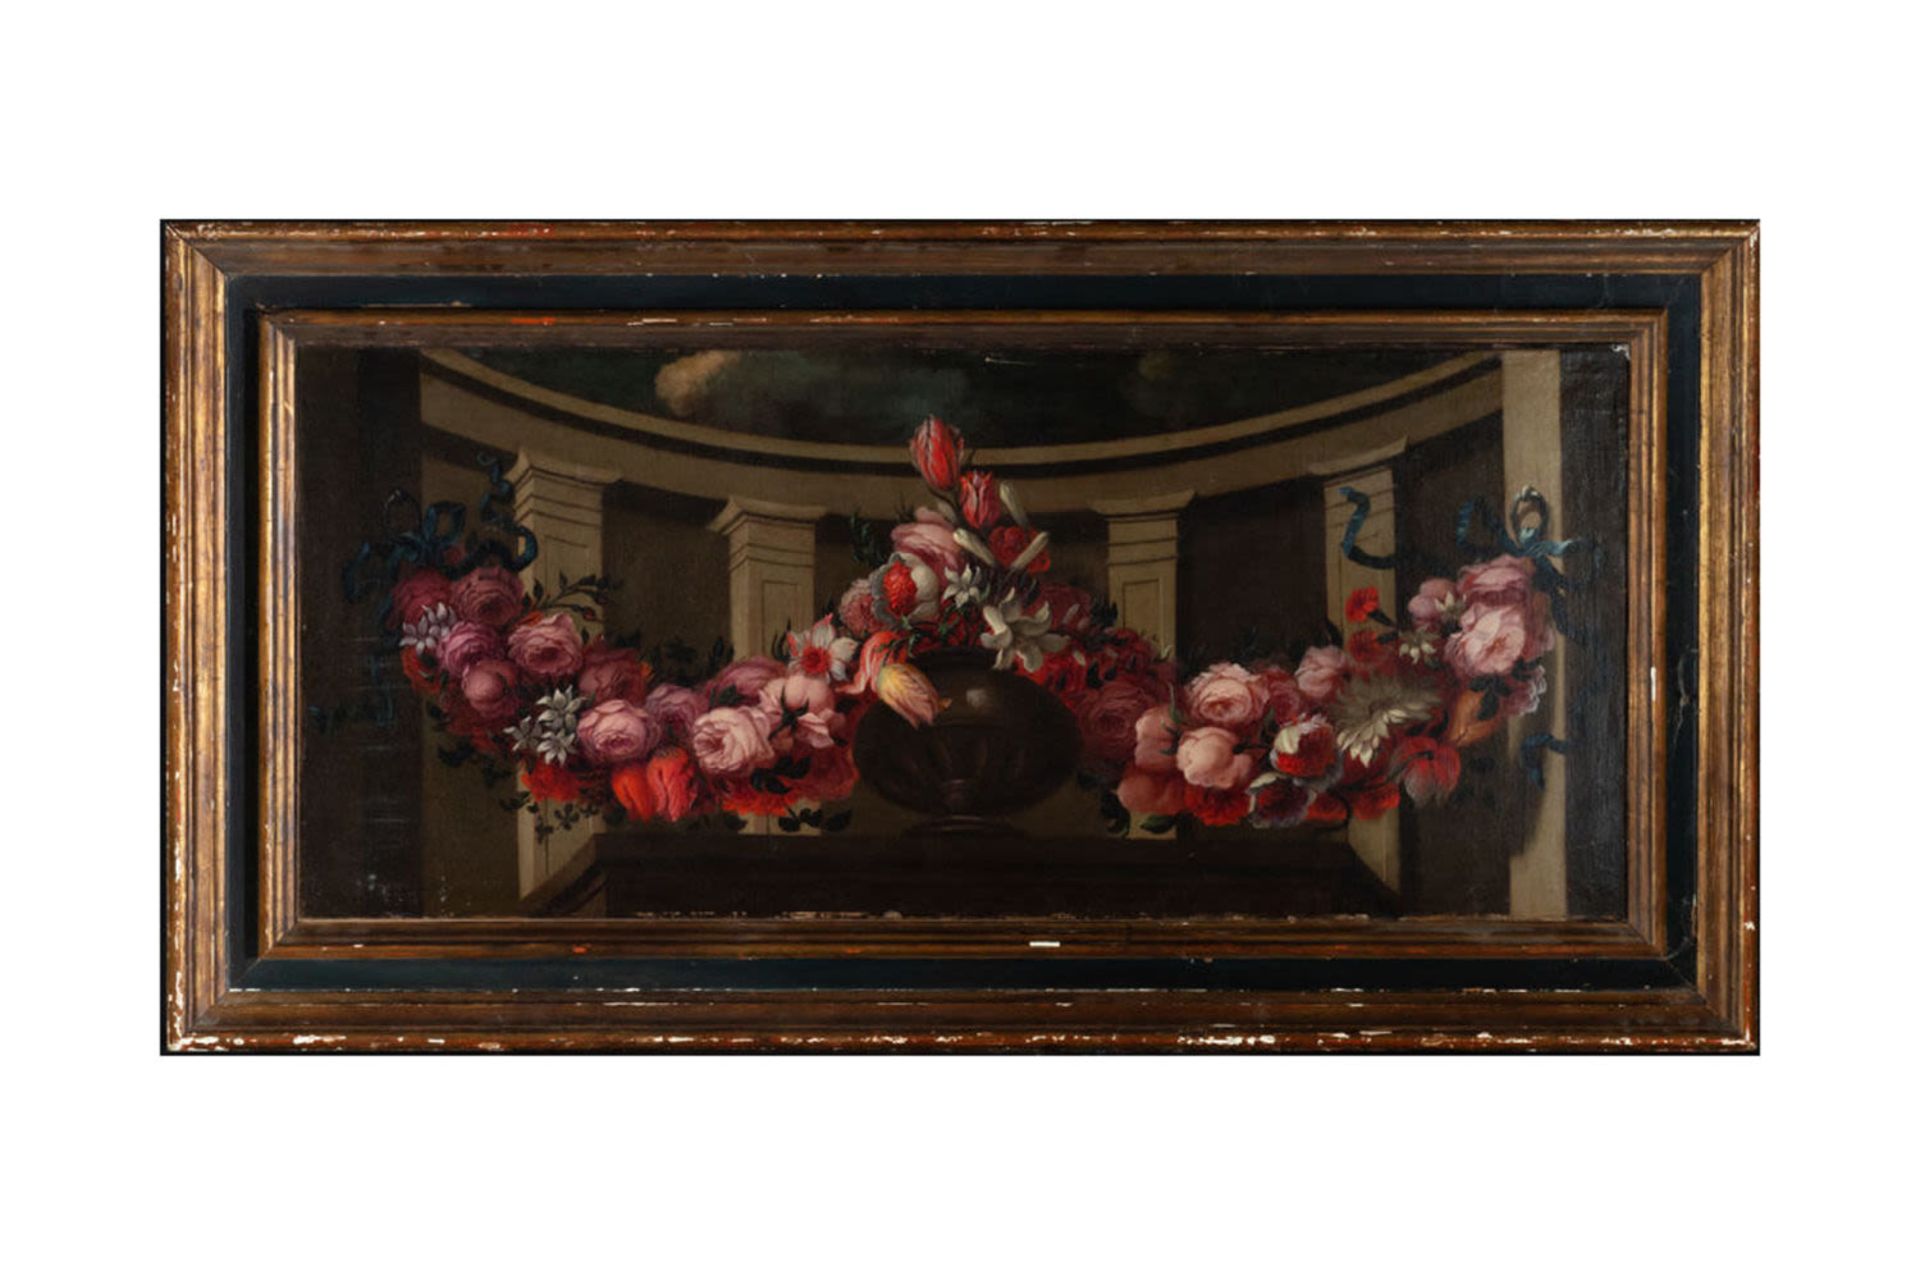 Garland of Flowers with Caprice in the background, Italian school of the 17th century